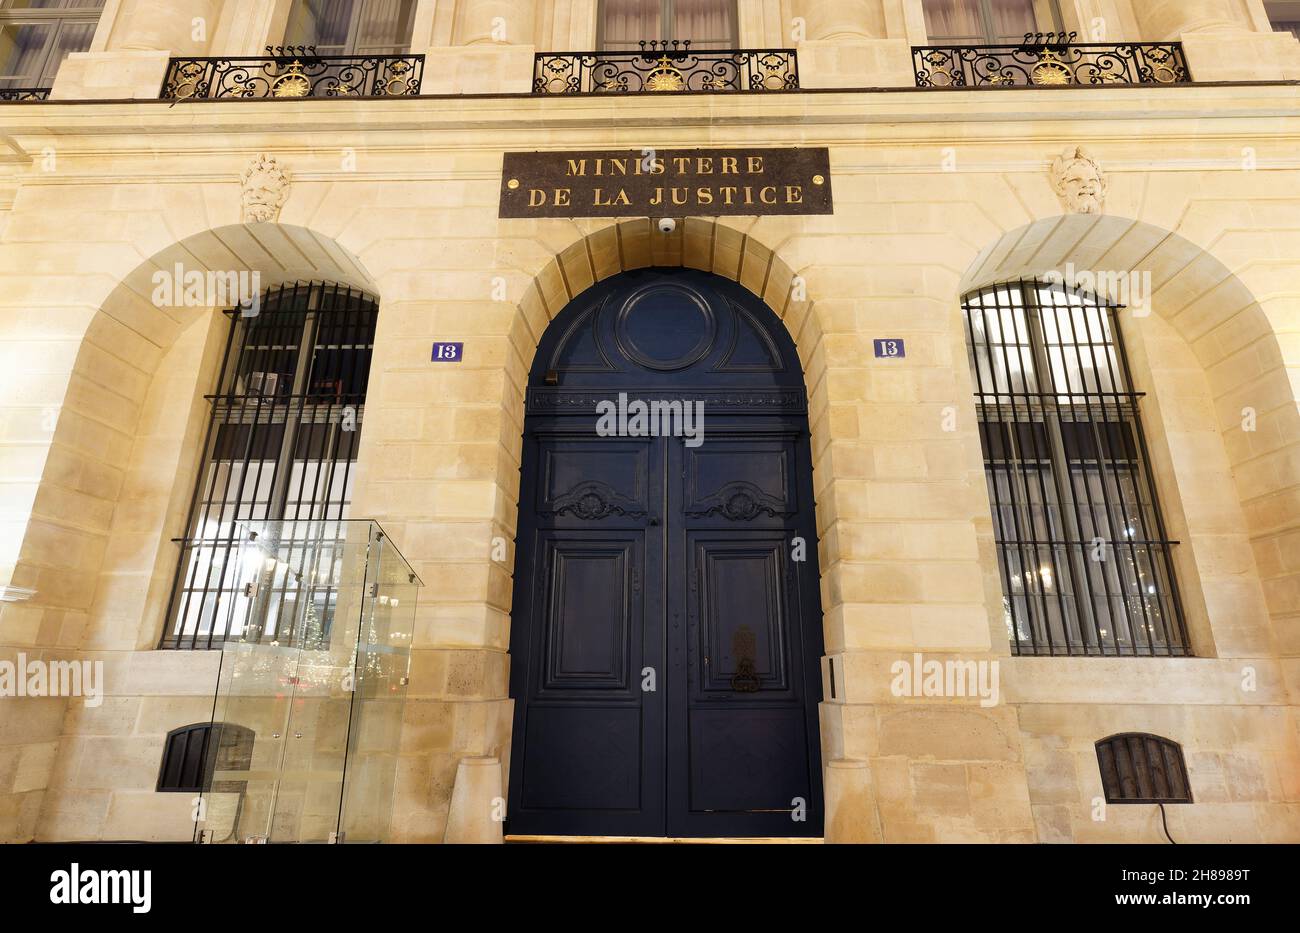 PARIS, FRANCE -November 27, 2021 : The French Ministry of Justice also known as the Chancellerie is located at the Hotel de Bourvallais on famous Vend Stock Photo